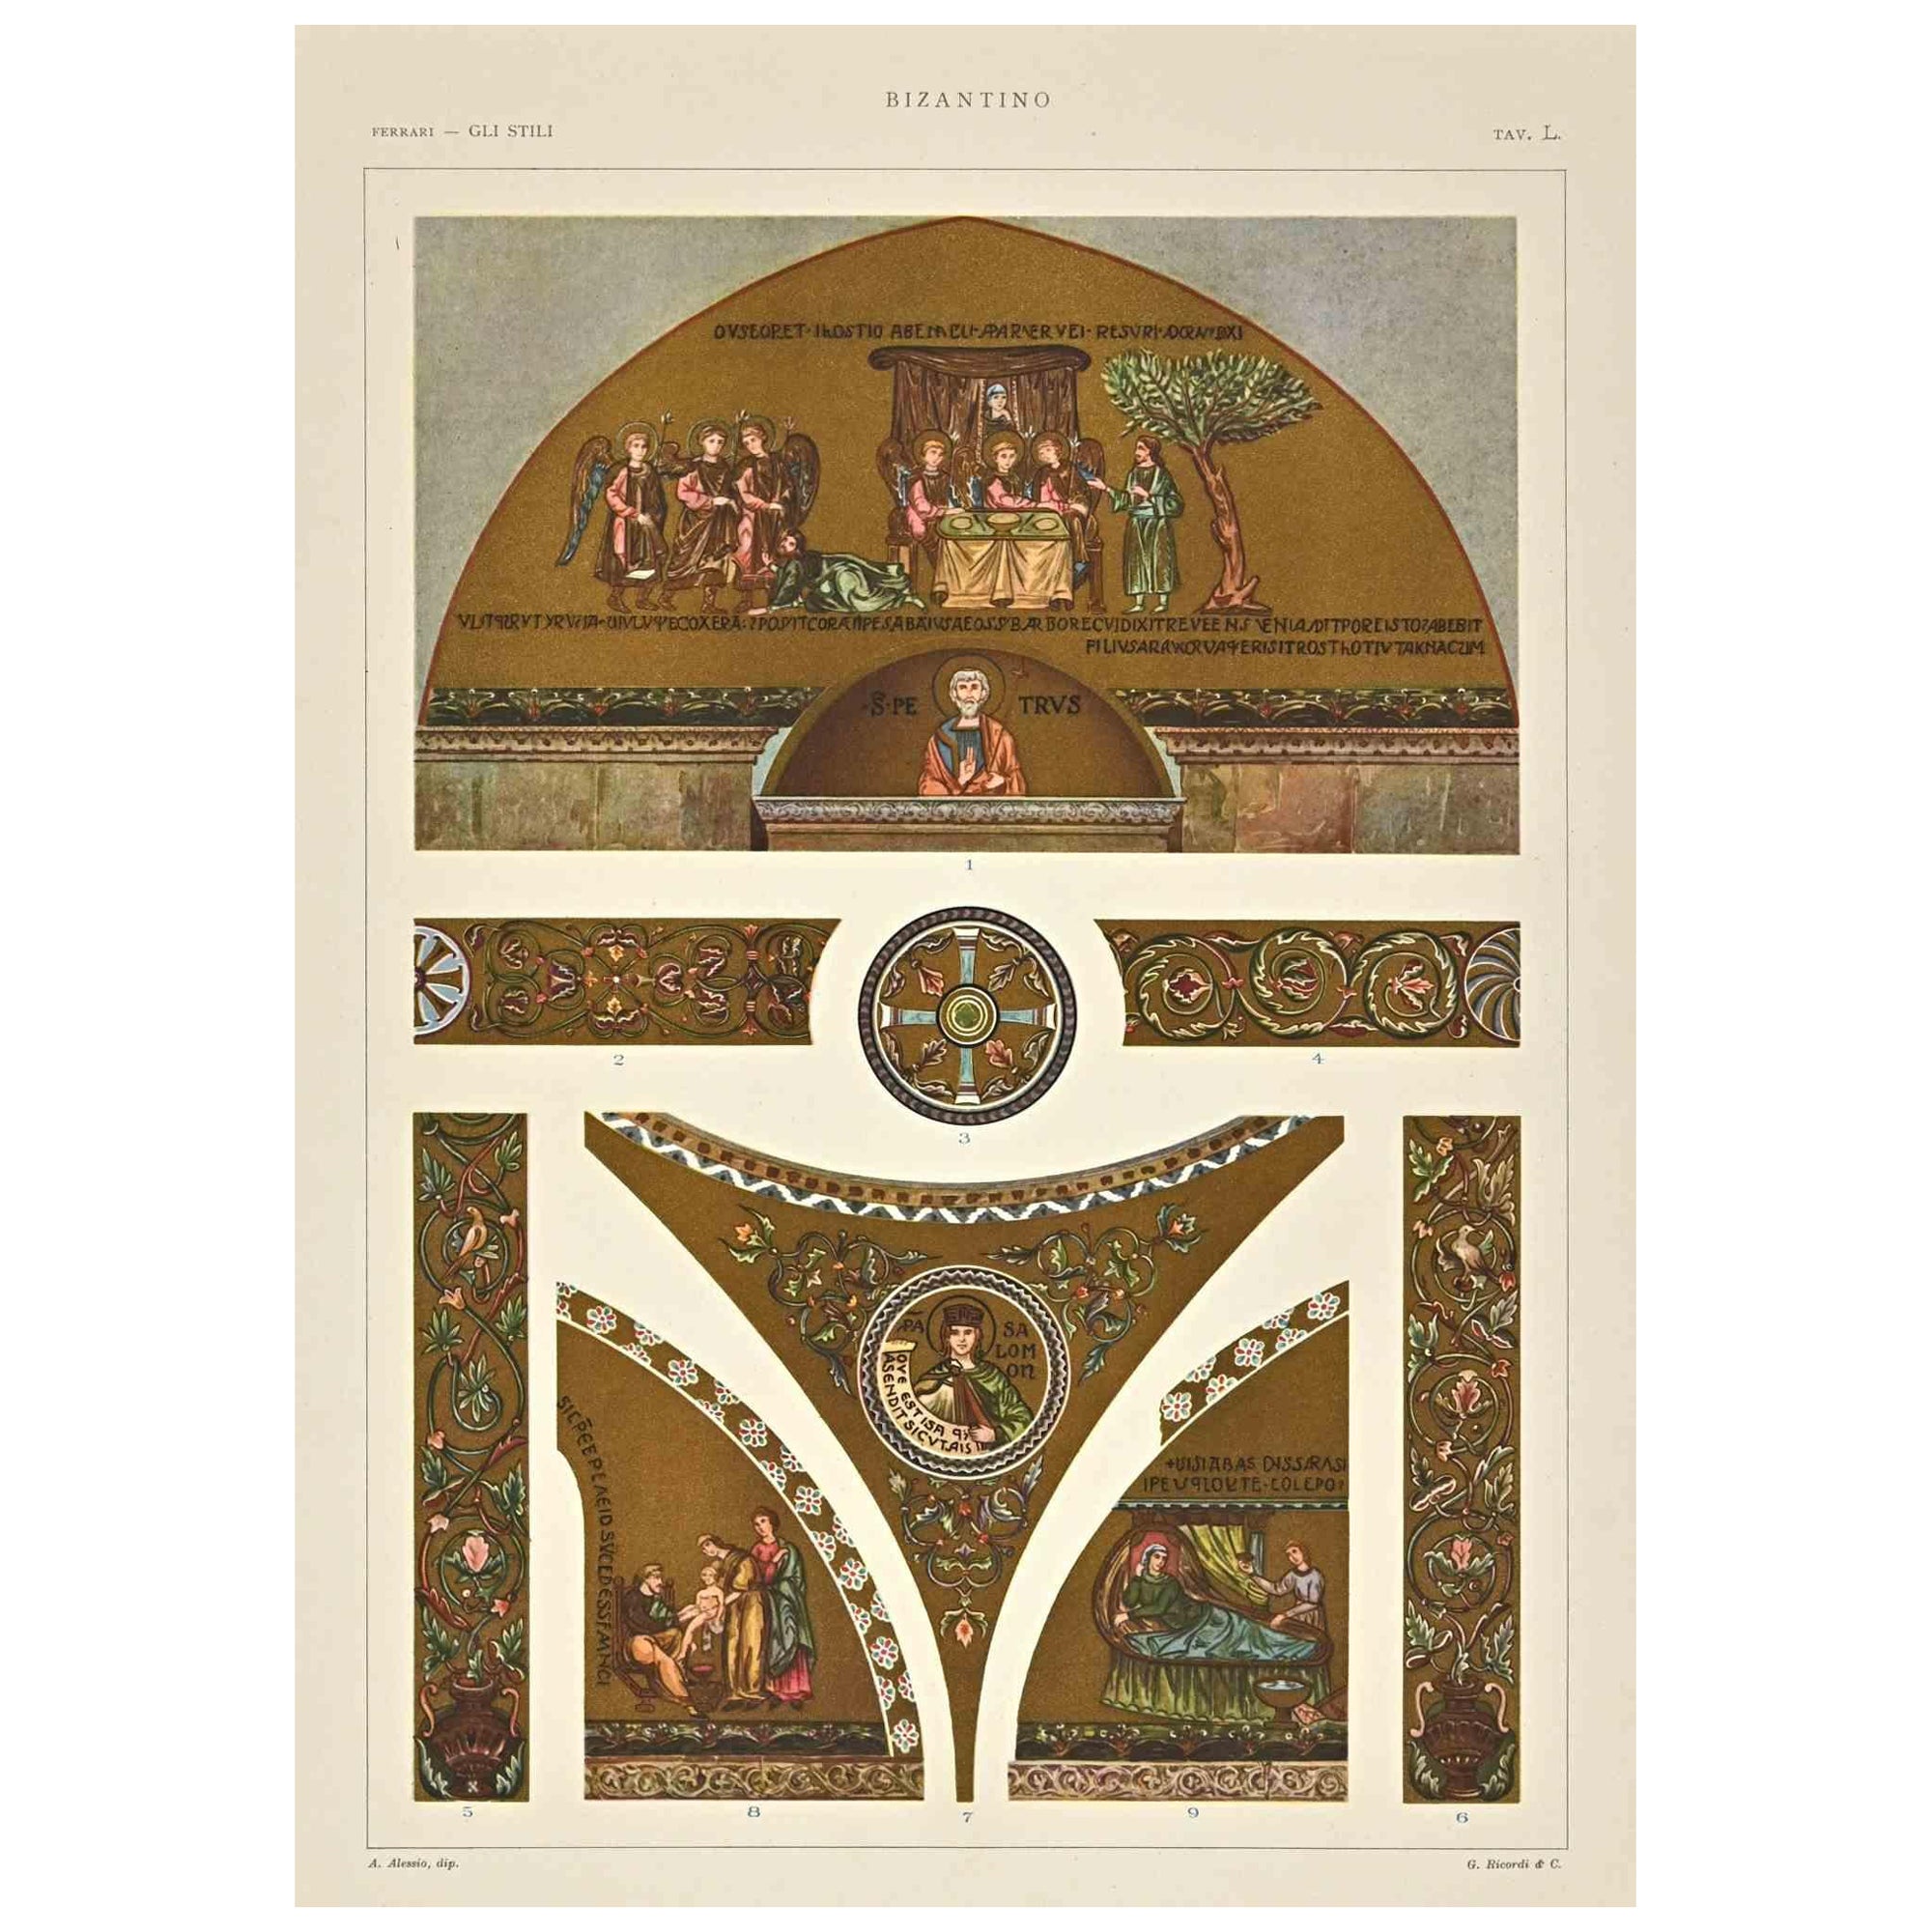 Byzantine Decorative Style is a print on ivory-colored paper realized by Andrea Alessio in the early 20th Century.

Signed on the plate on the lower.

Vintage Chromolithograph.

Very good conditions.

The artwork represents Decorative motifs through